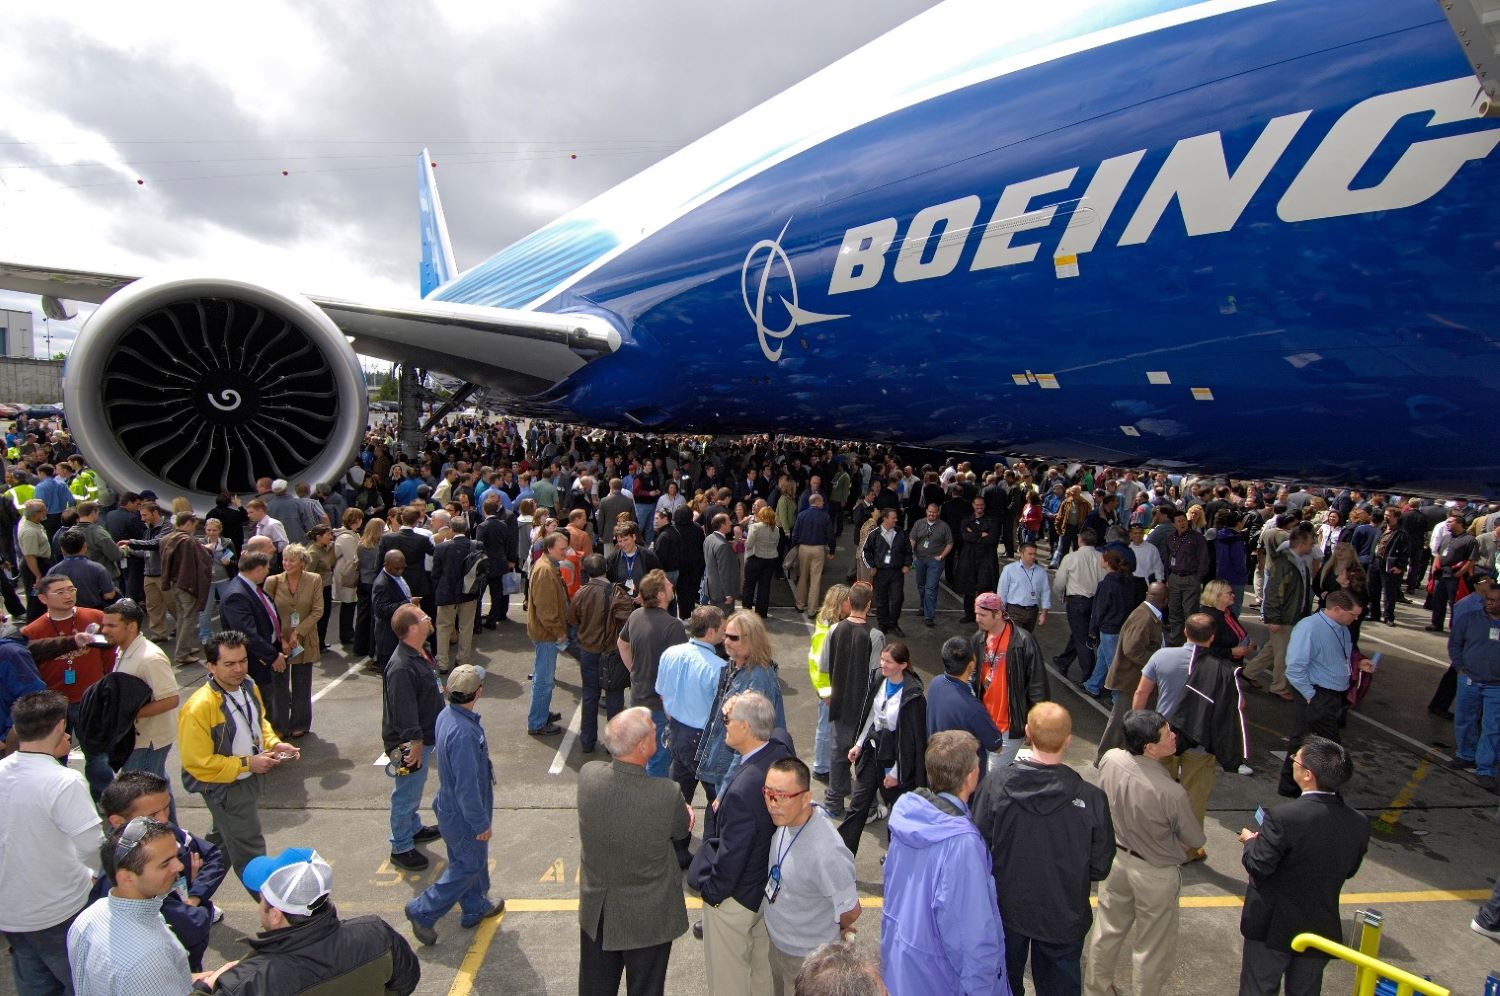 Boeing new product launching day